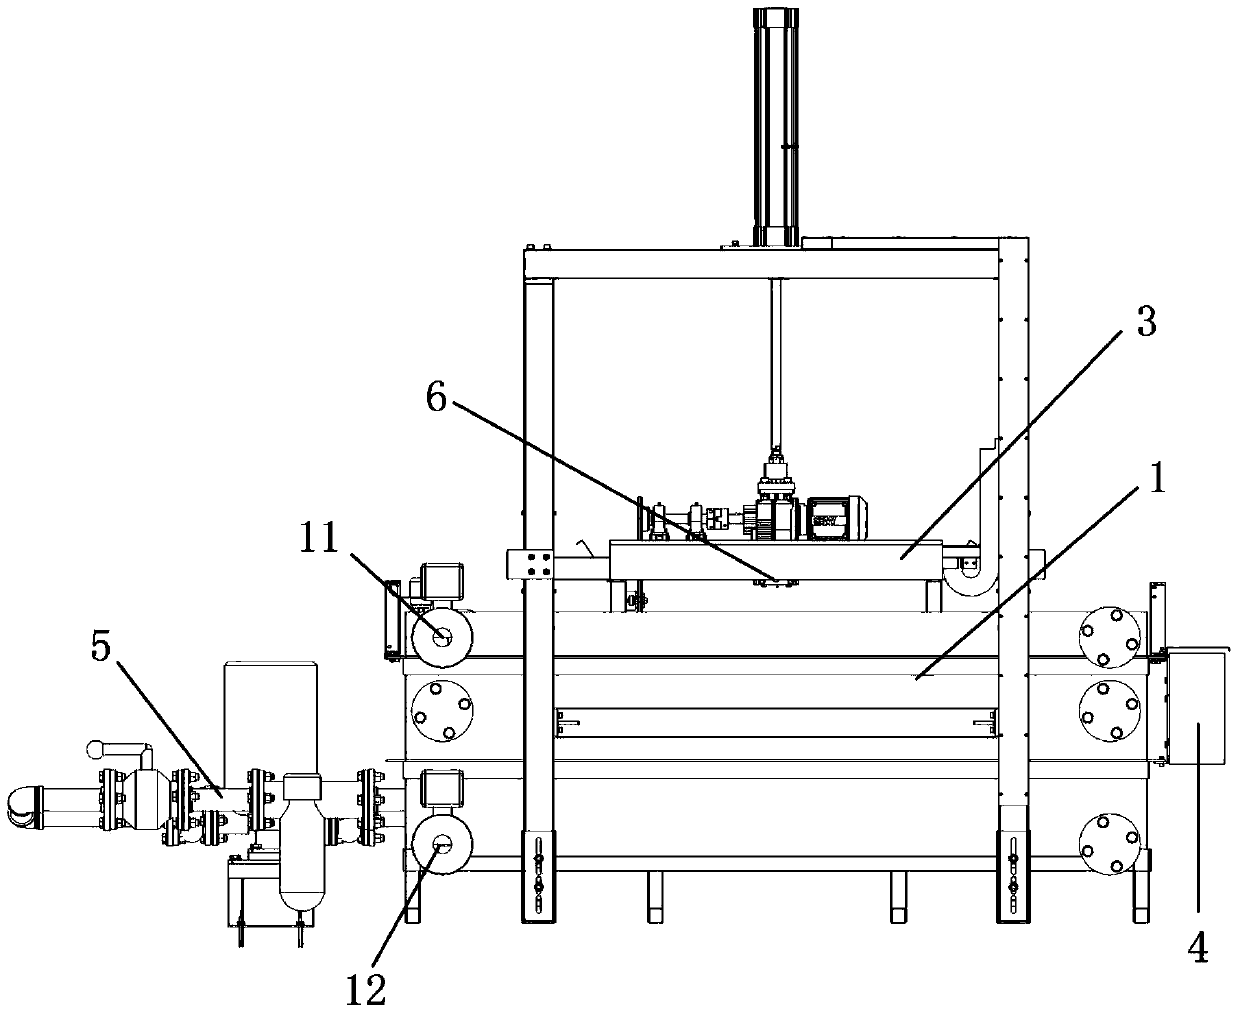 Automatic wheel hub cleaning device, automatic wheel hub cleaning system, and automatic wheel hub cleaning method